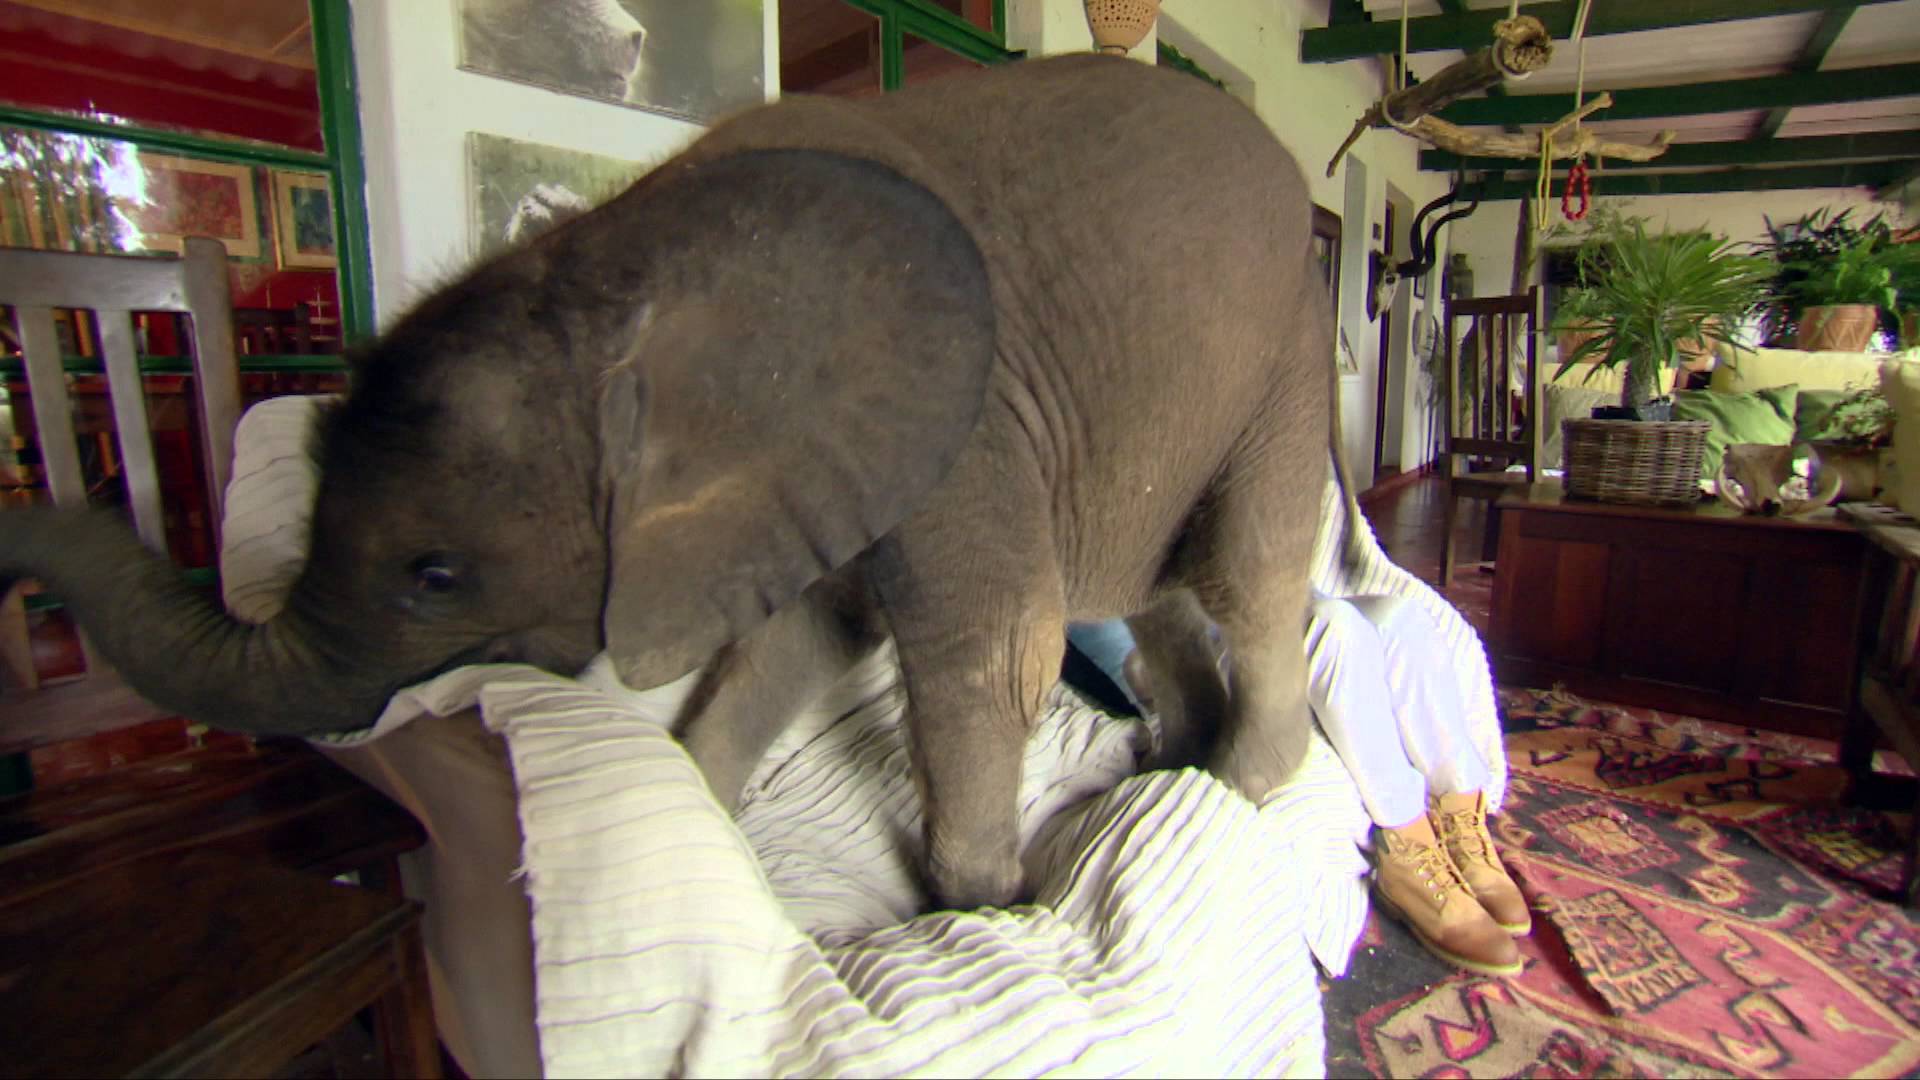 Baby elephant causes havoc at home - Nature's Miracle Orphans: Series 2 Episode 1 Preview - BBC One